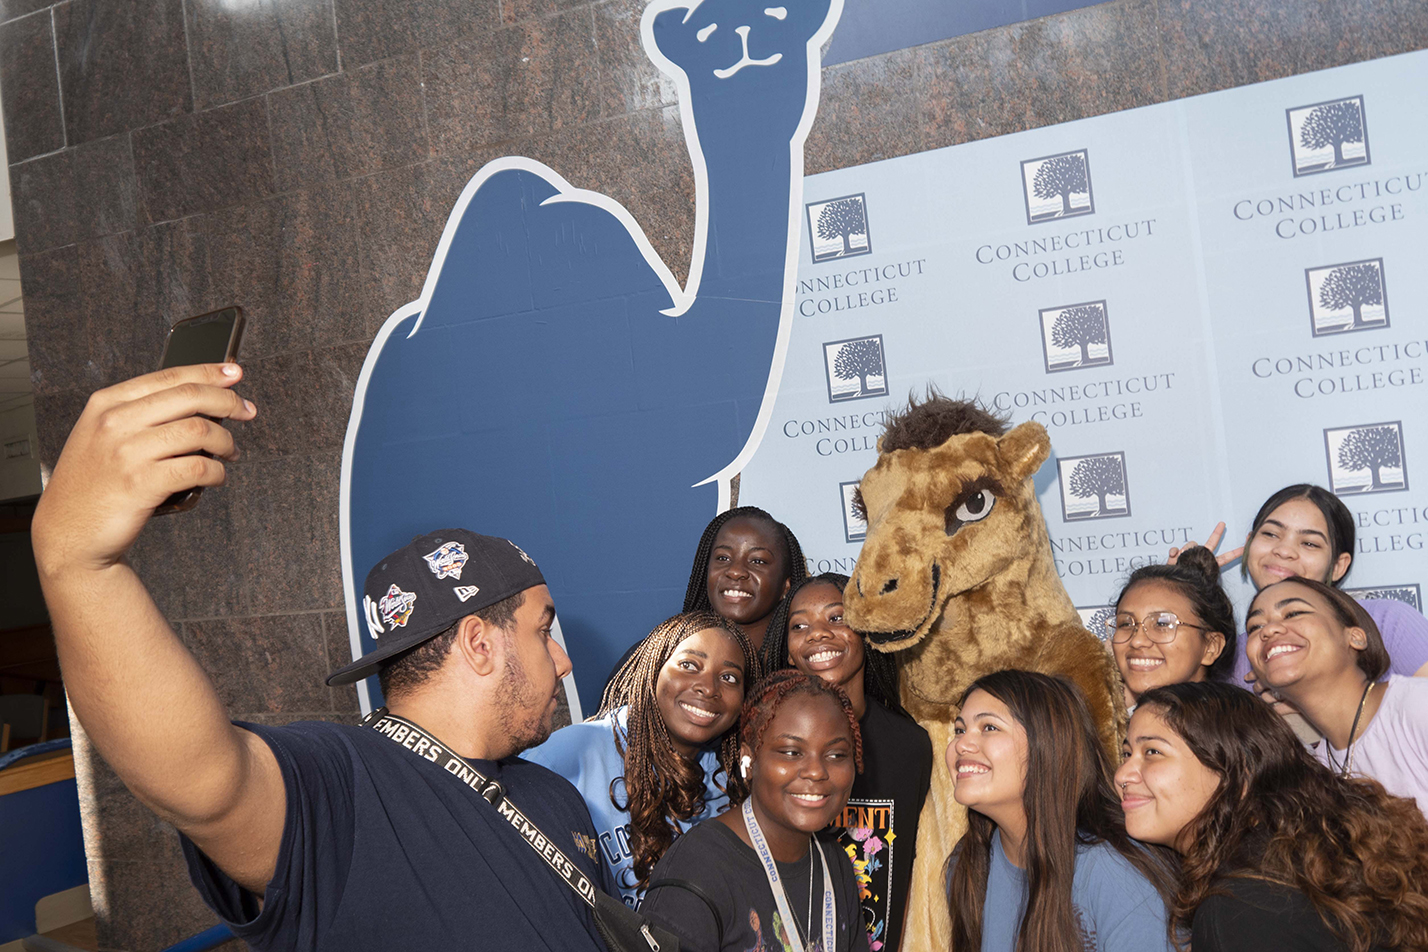 Students pose for a selfie with the Camel mascot